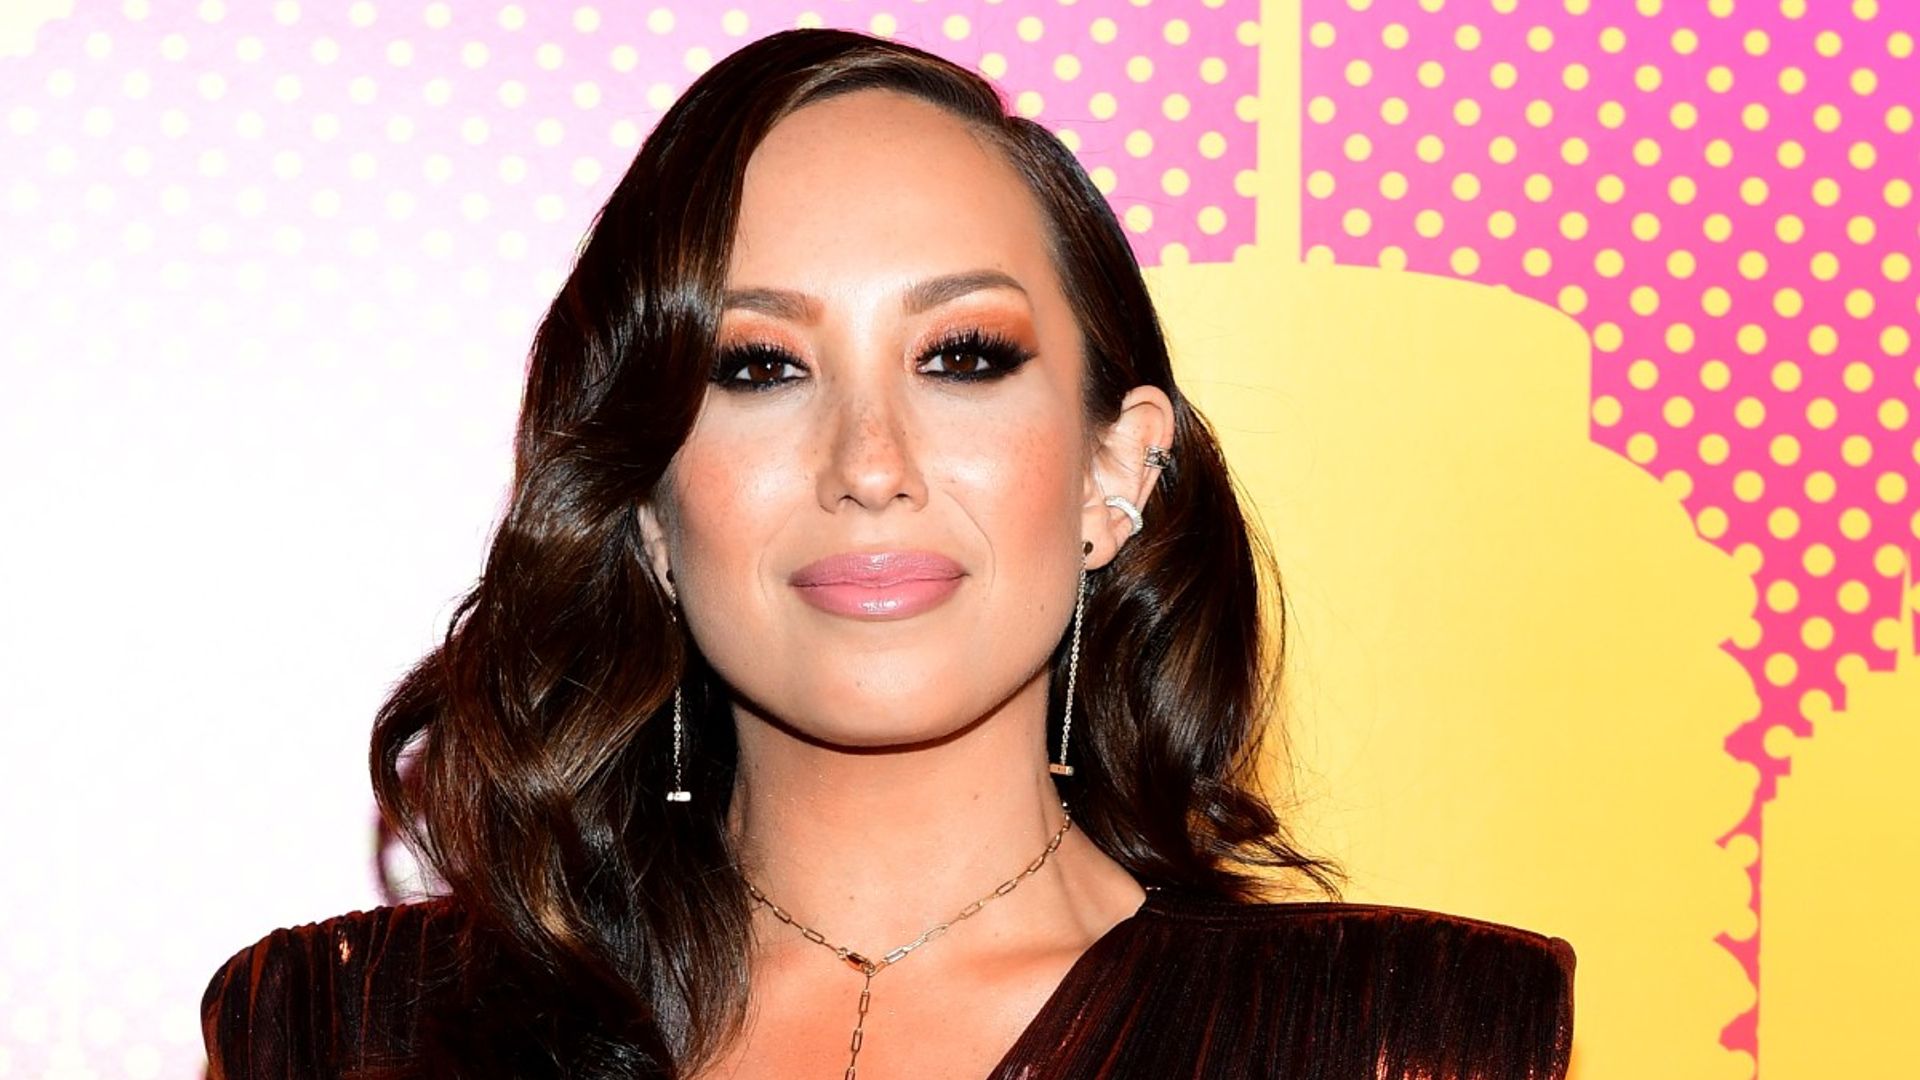 Dancing with the Stars' Cheryl Burke reveals she is dating again amid divorce